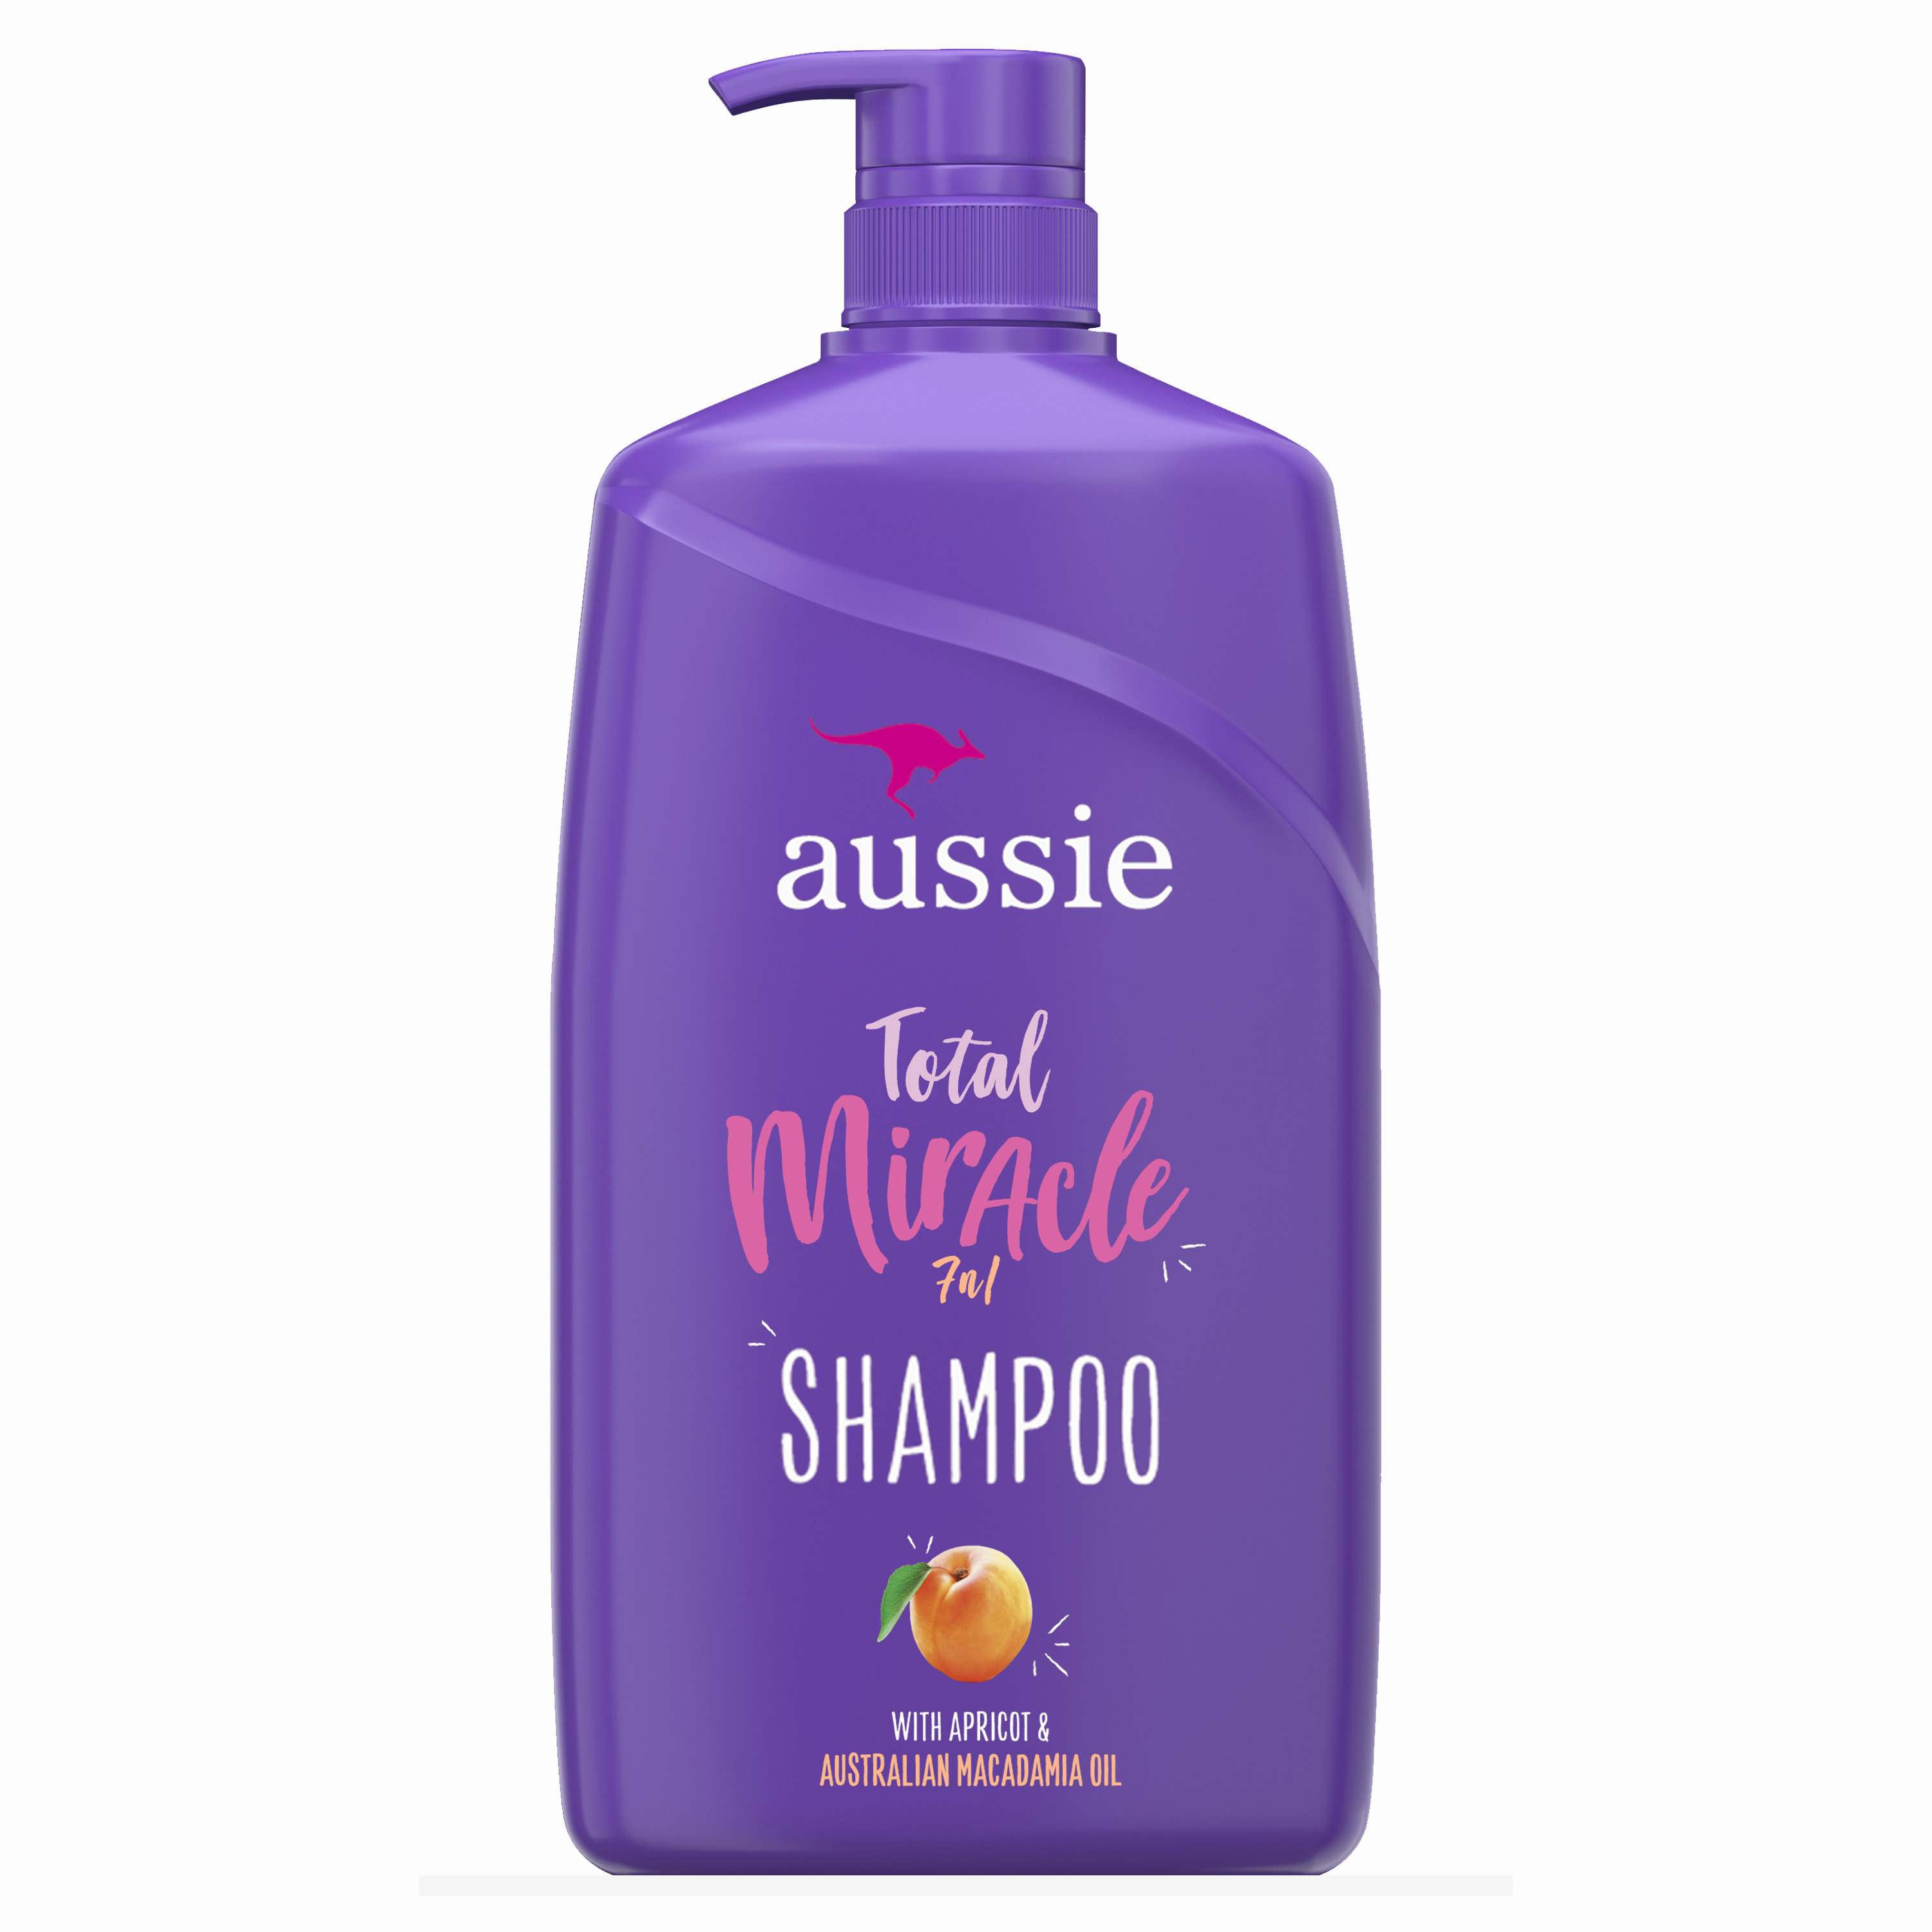 Aussie Total Miracle Shampoo, Paraben Free, for All Hair Types 26.2 fl oz - image 1 of 9